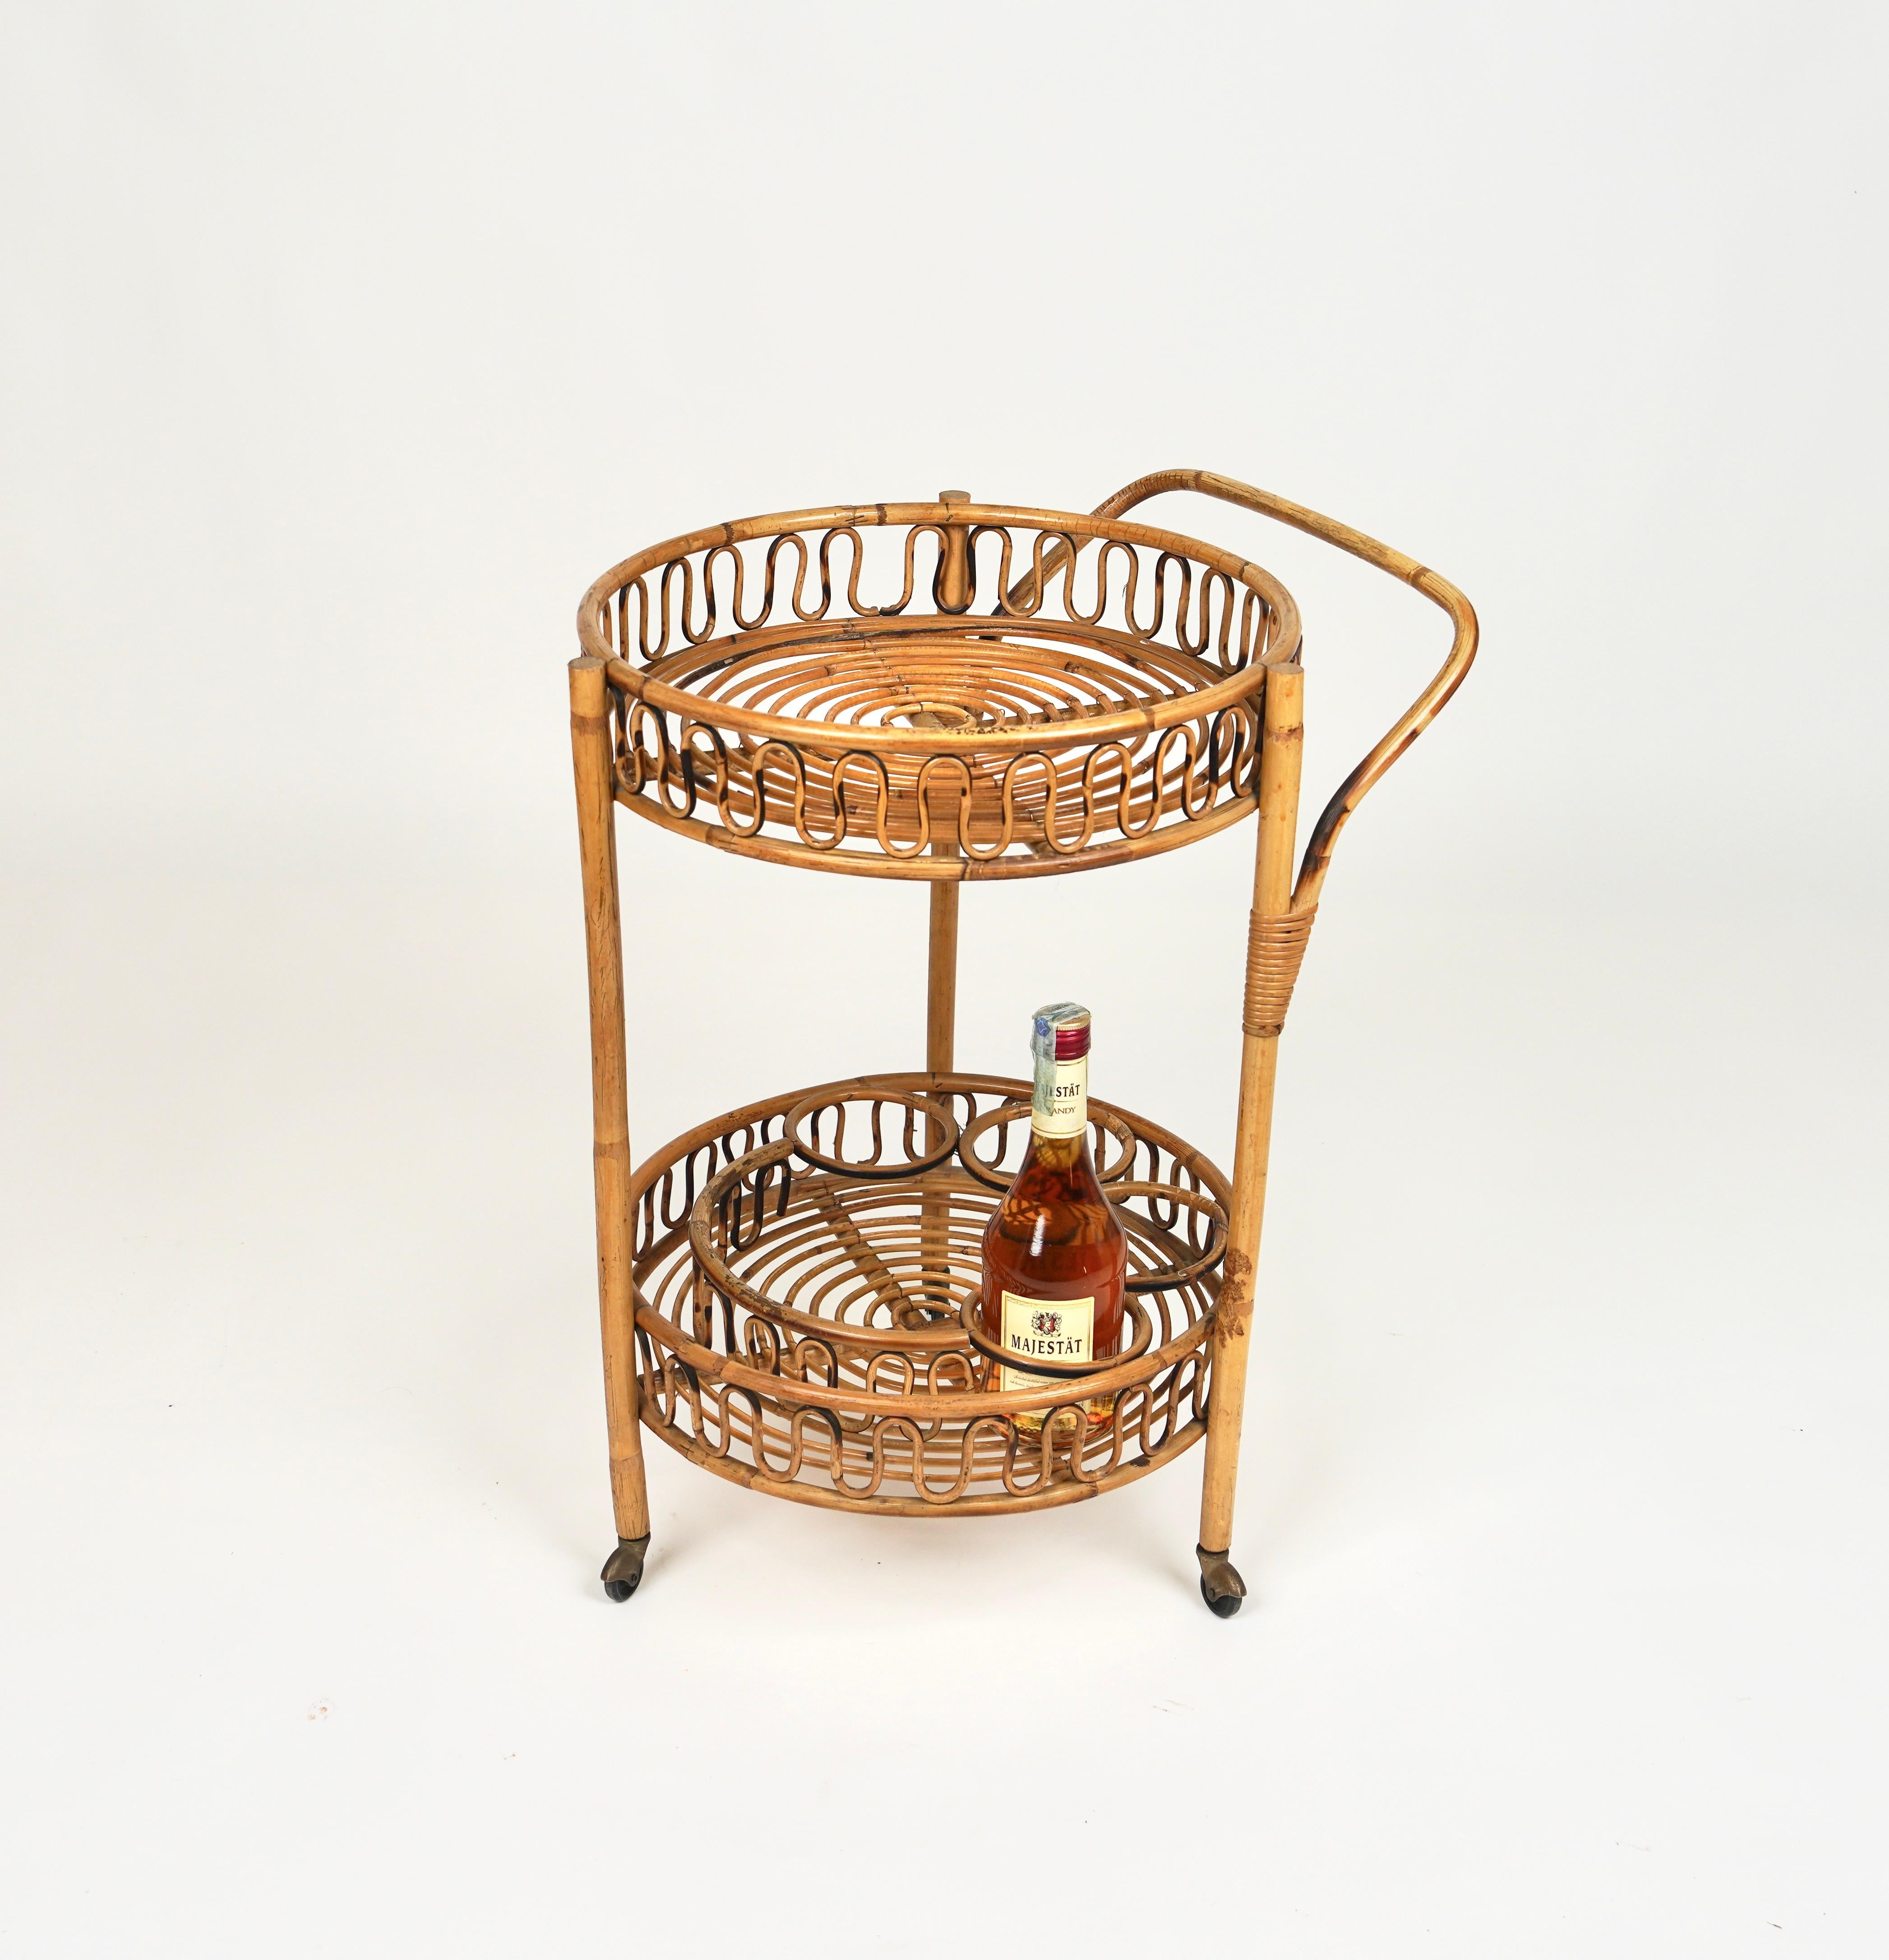 Italian Midcentury Bamboo and Rattan Round Serving Bar Cart Trolley, Italy, circa 1960s For Sale